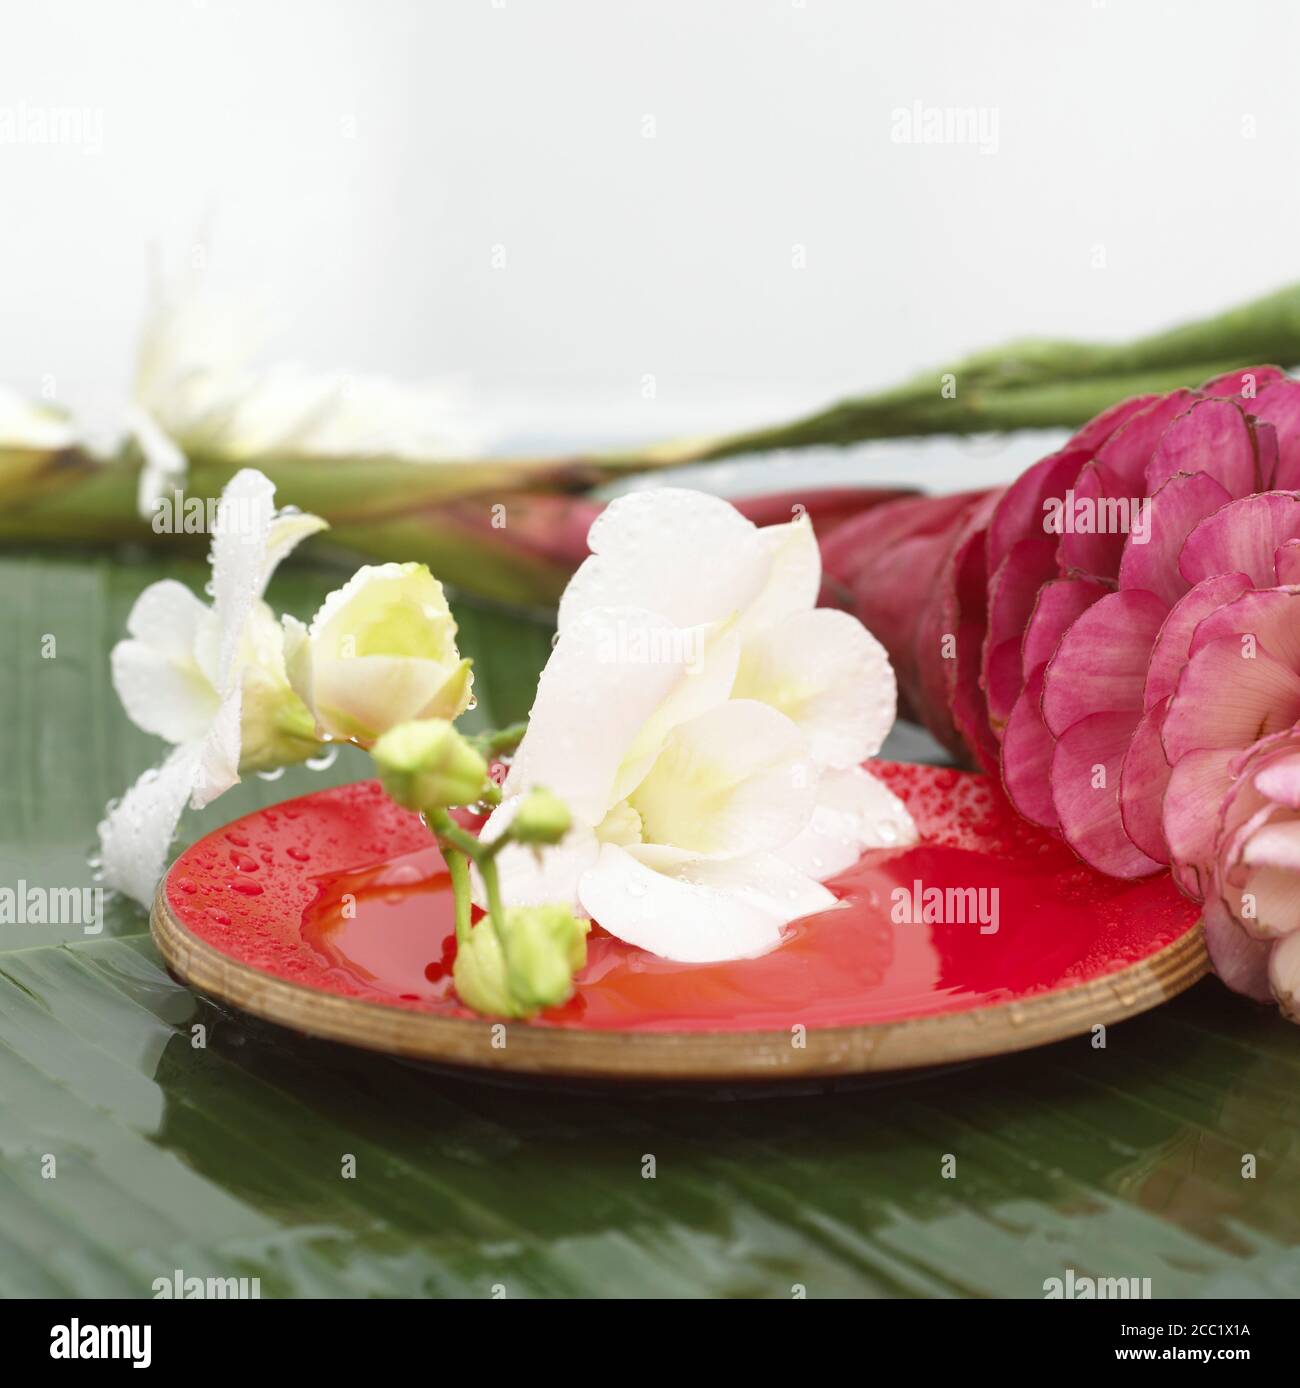 Orchid blossom on wooden plate, close-up Stock Photo